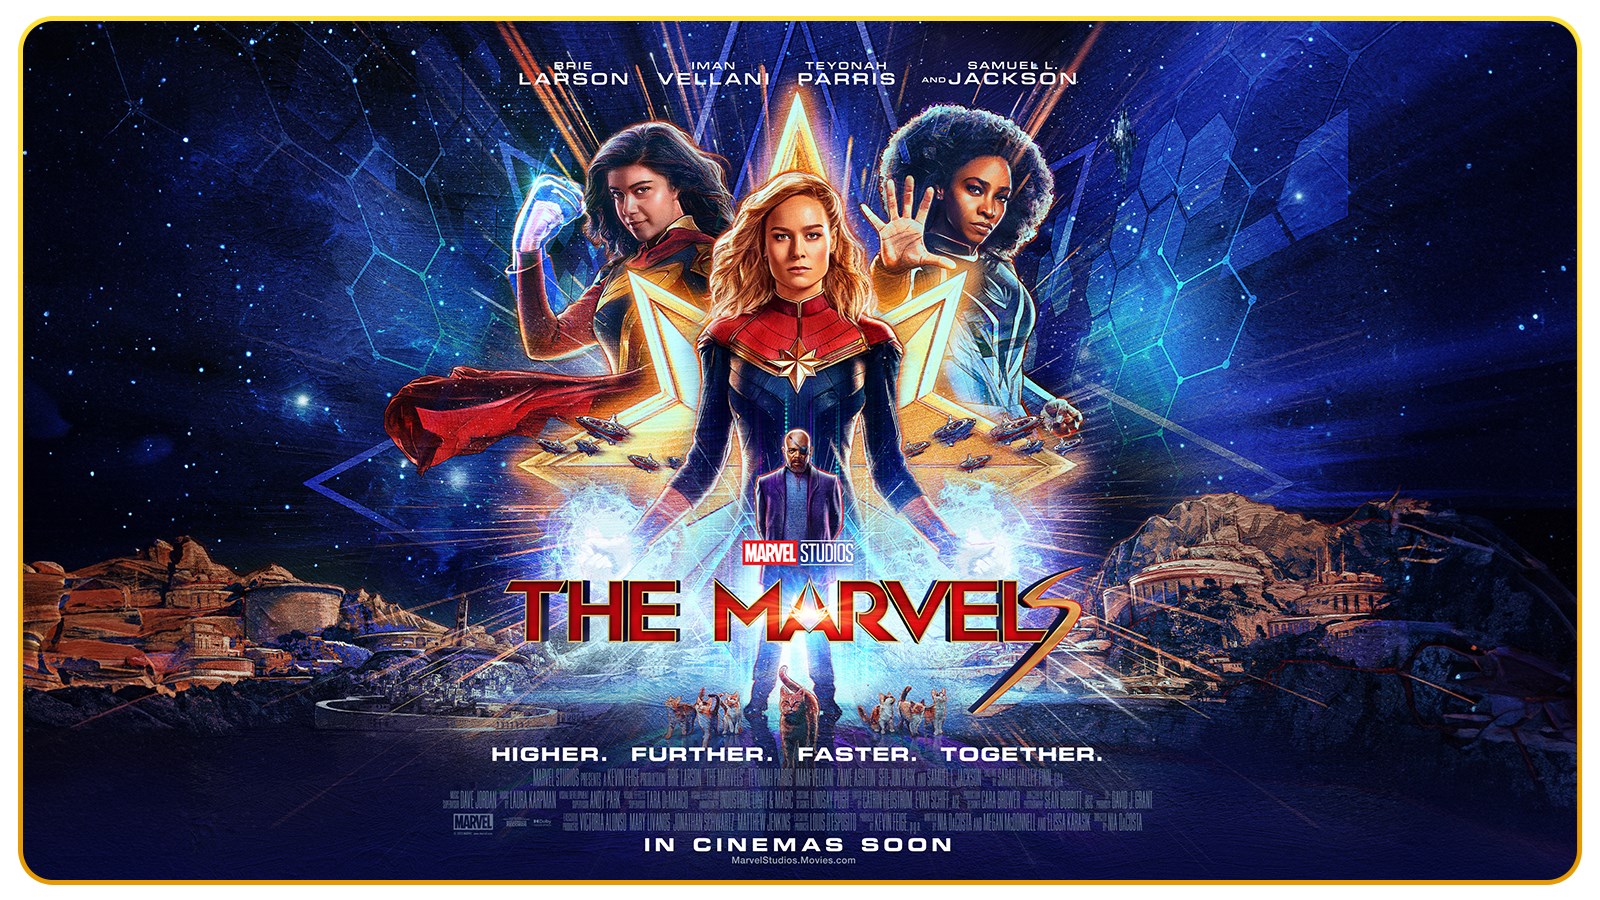 MARVELS, THE